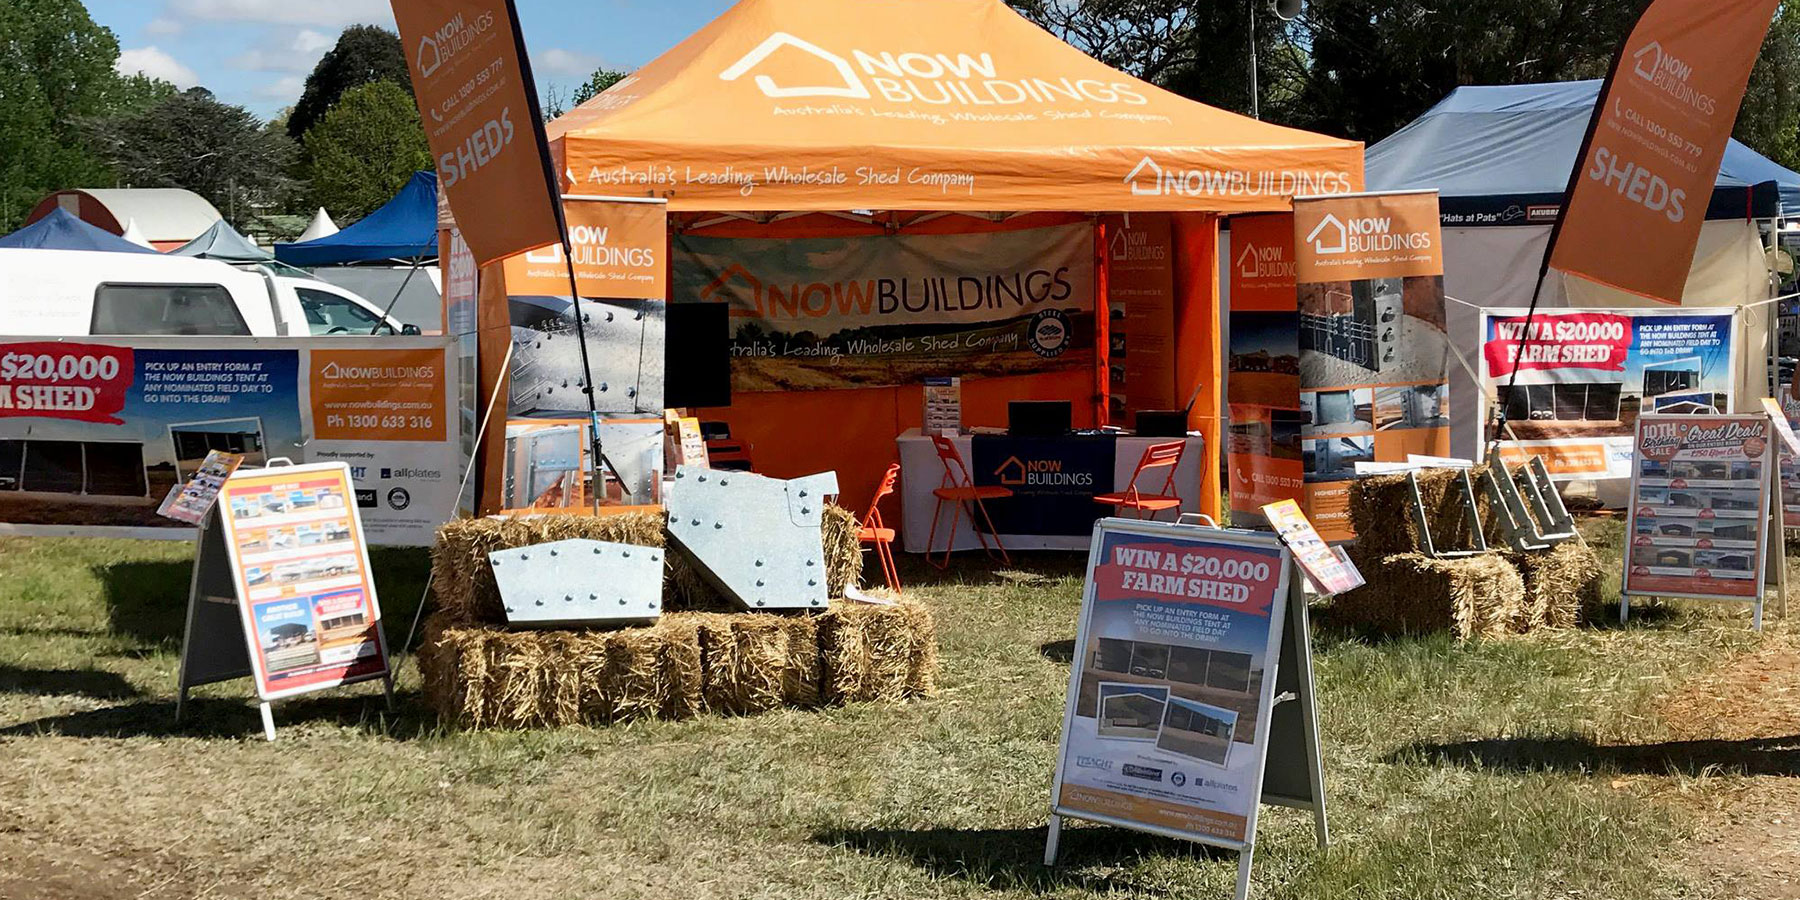 Exhibiting_at_Henty_Machinery_Field_Day